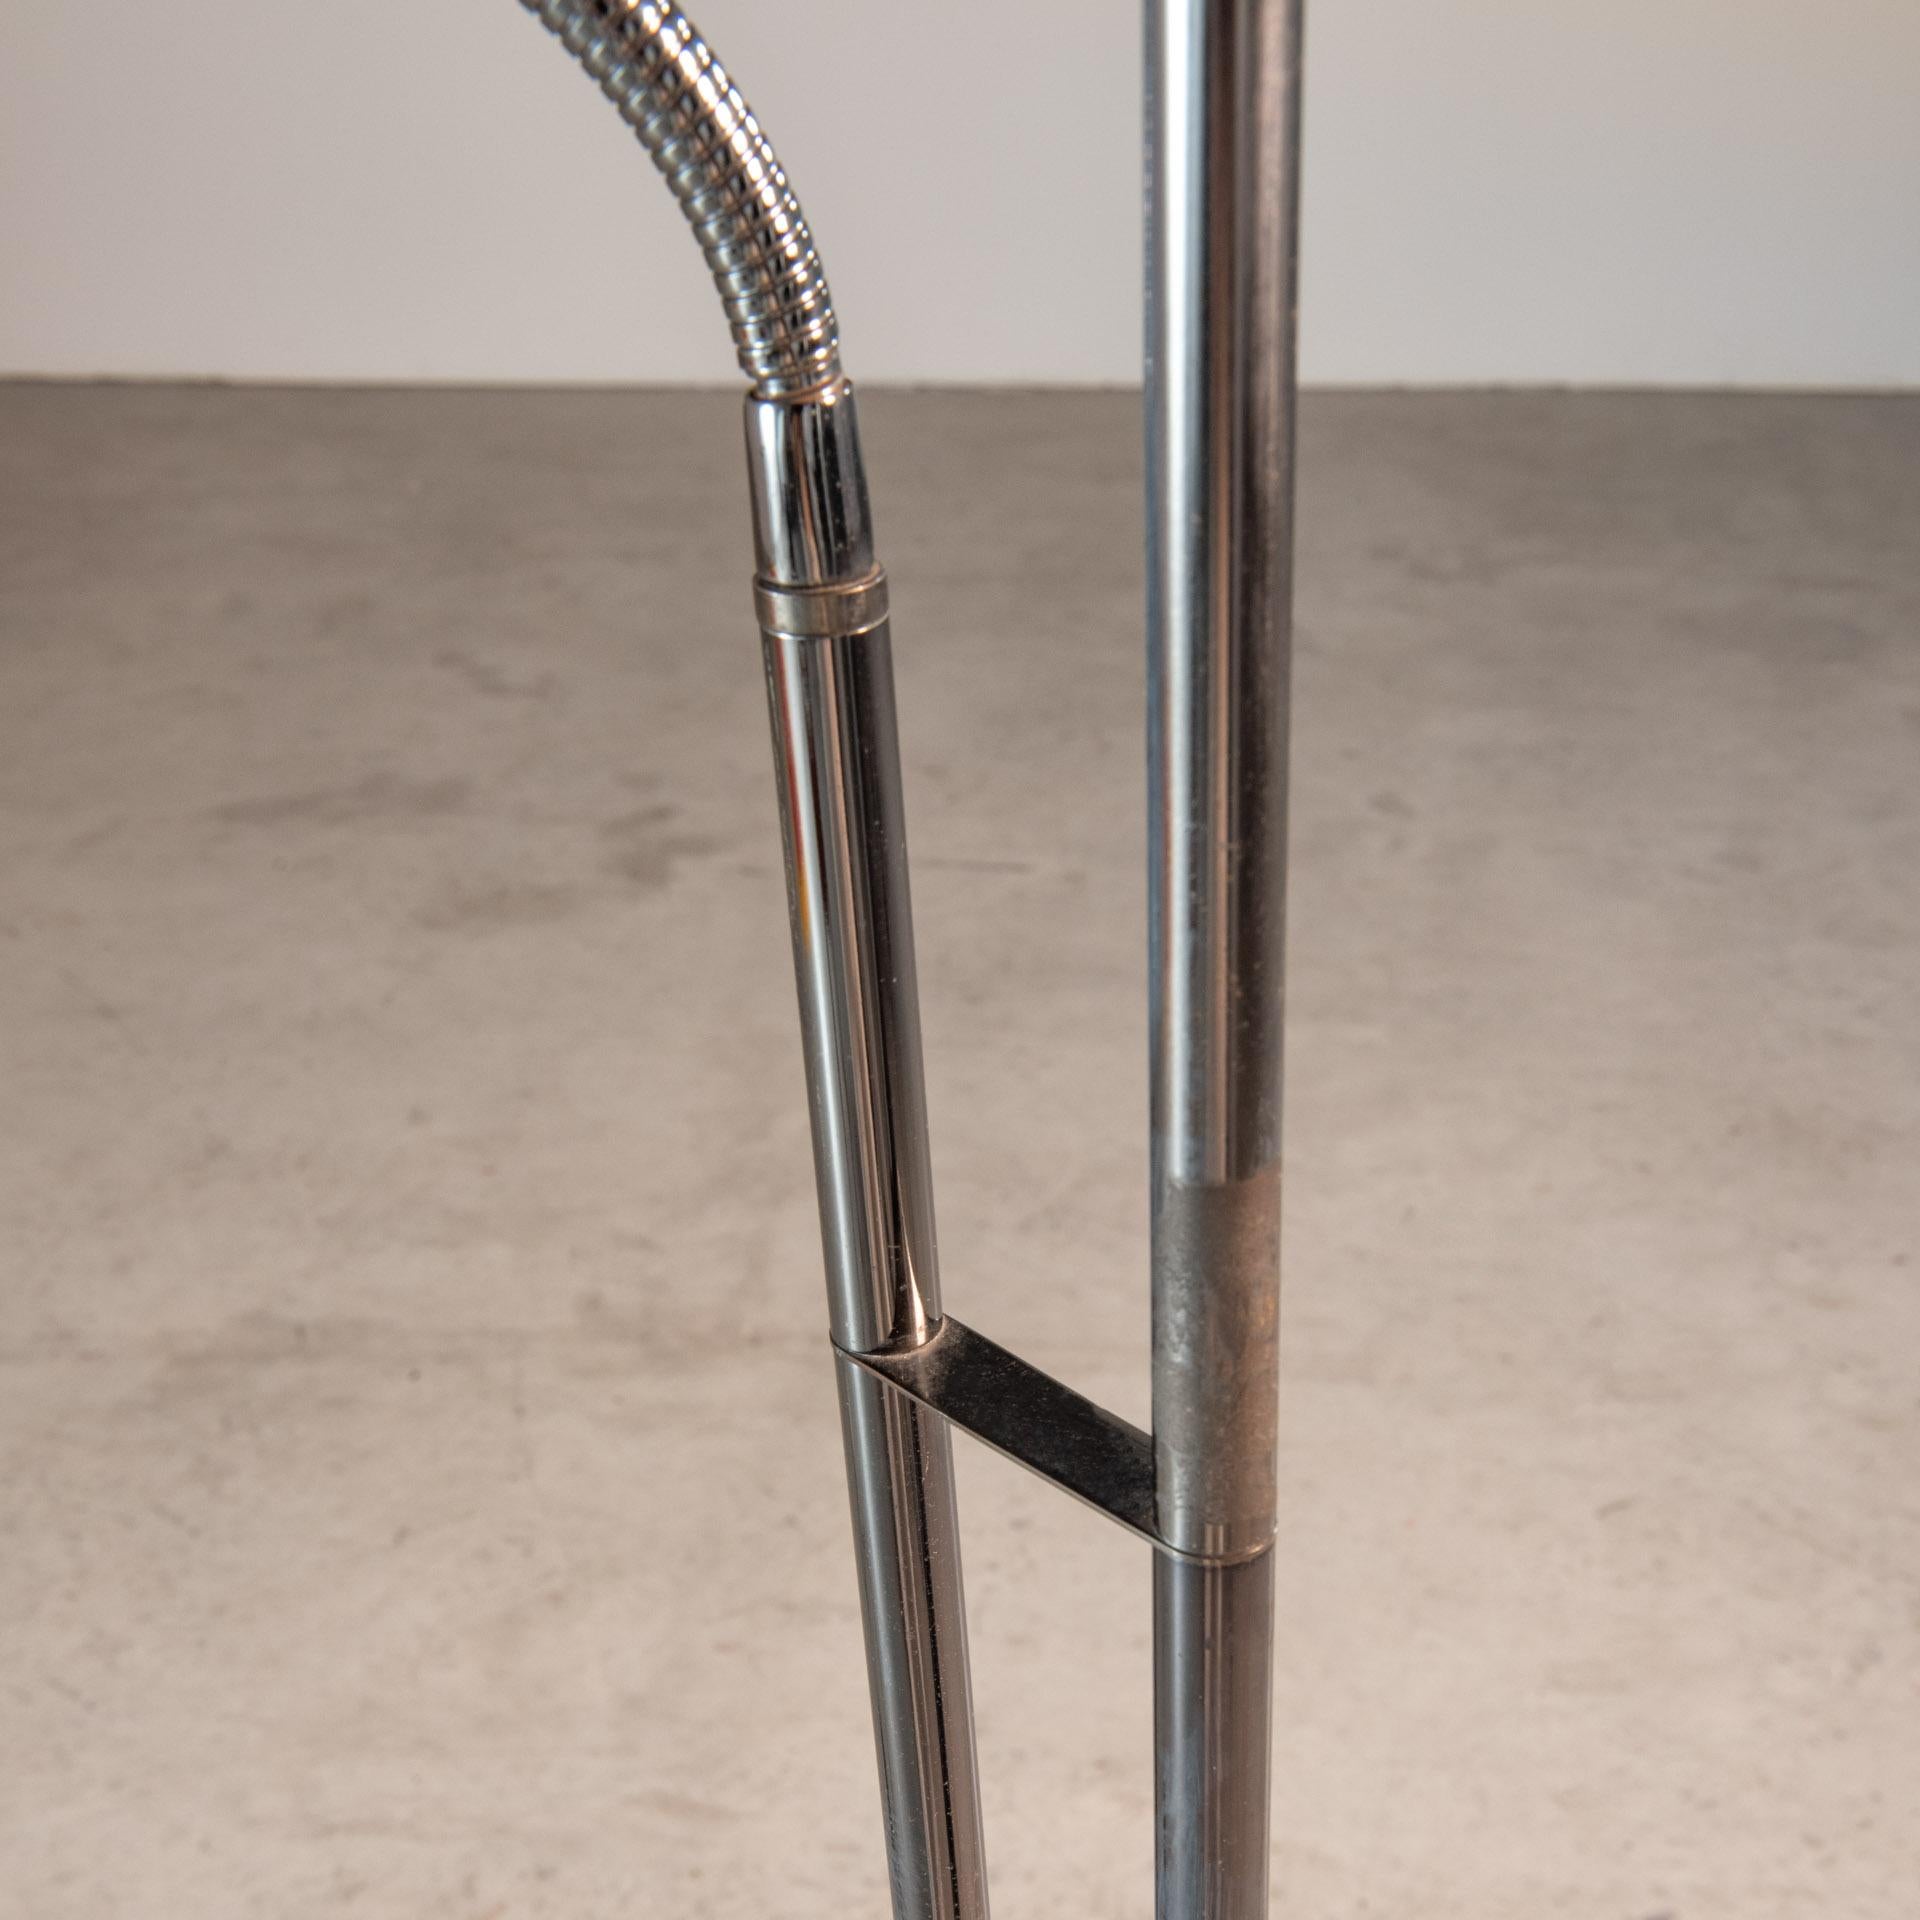 Steel Floor Lamp in Chrome with two Arms, by Dominici, Brazilian Mid-Century Design For Sale